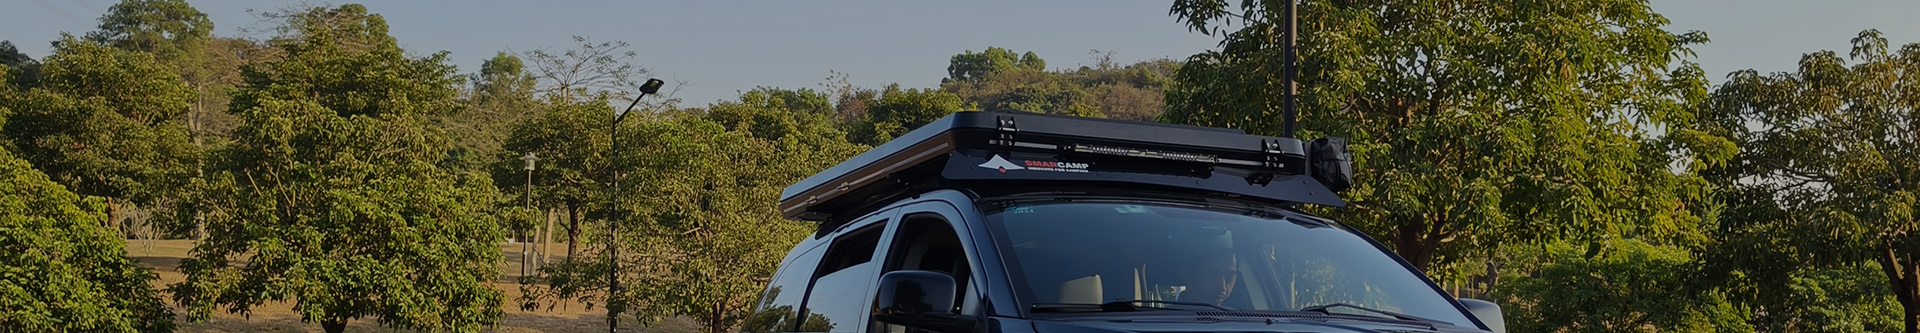 Hard Shell Rooftop Tent With SkyLight, Sunroof Entrance, Desk